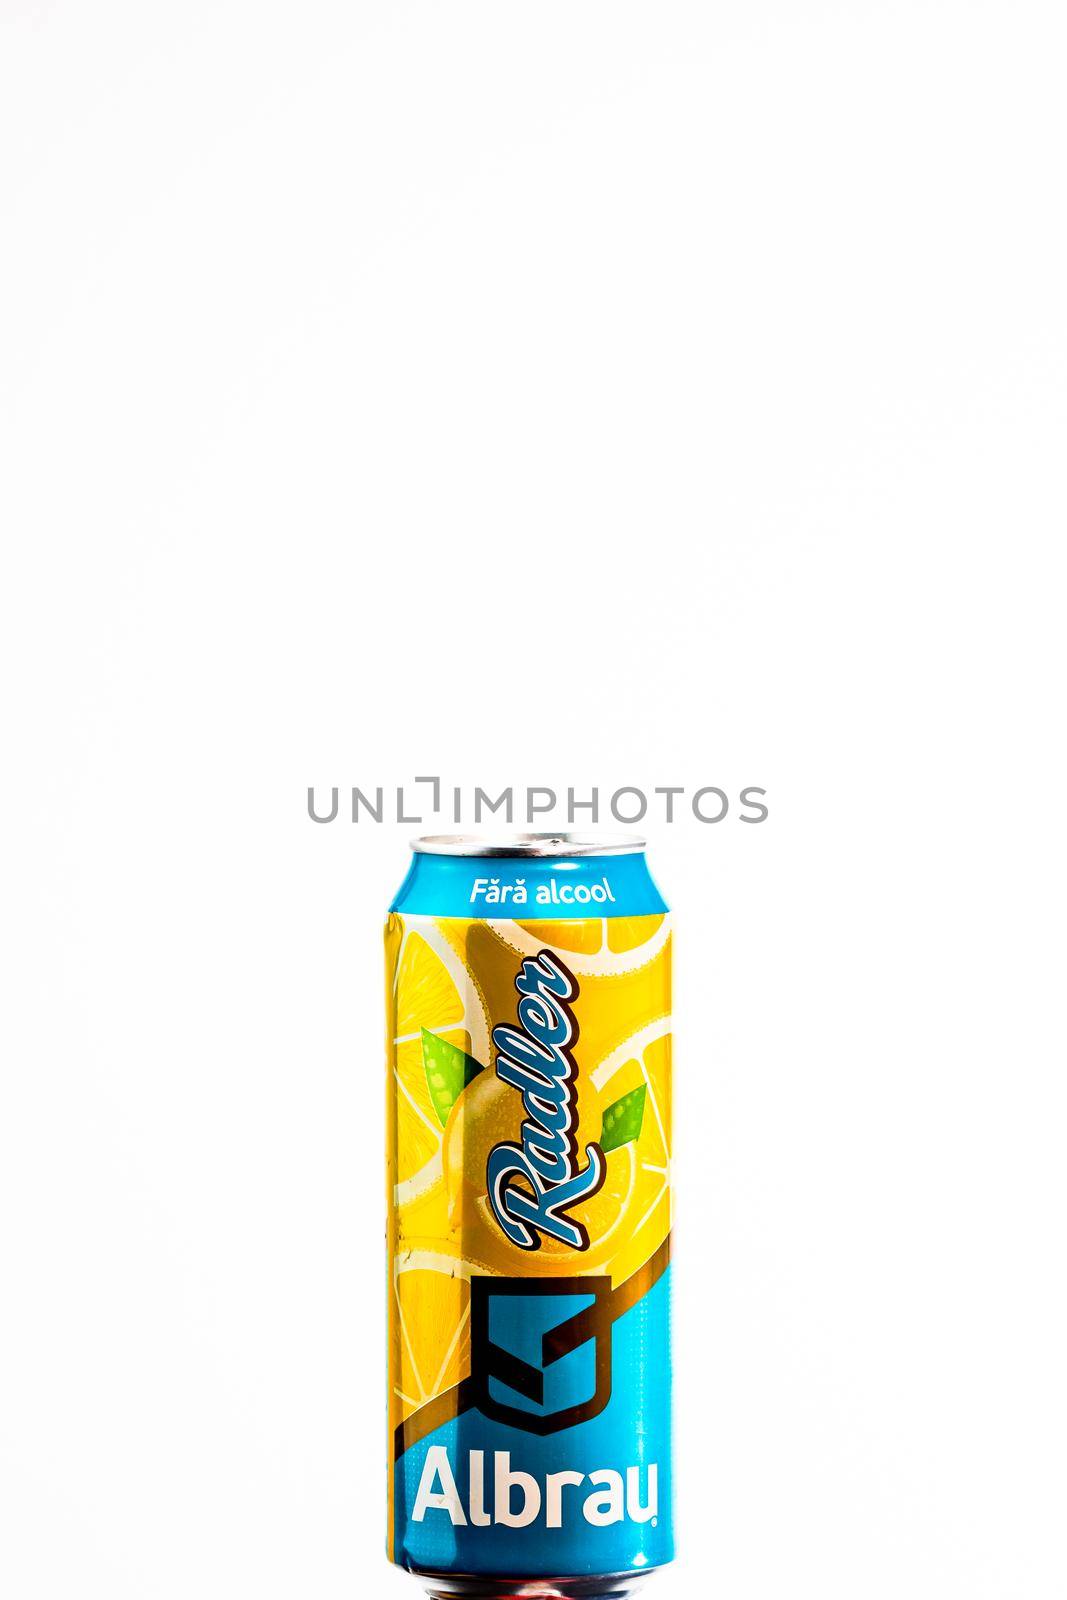 Albrau Radler Beer from Romanian local brewery isolated. Detail photo of beer can in Bucharest, Romania, 2020 by vladispas